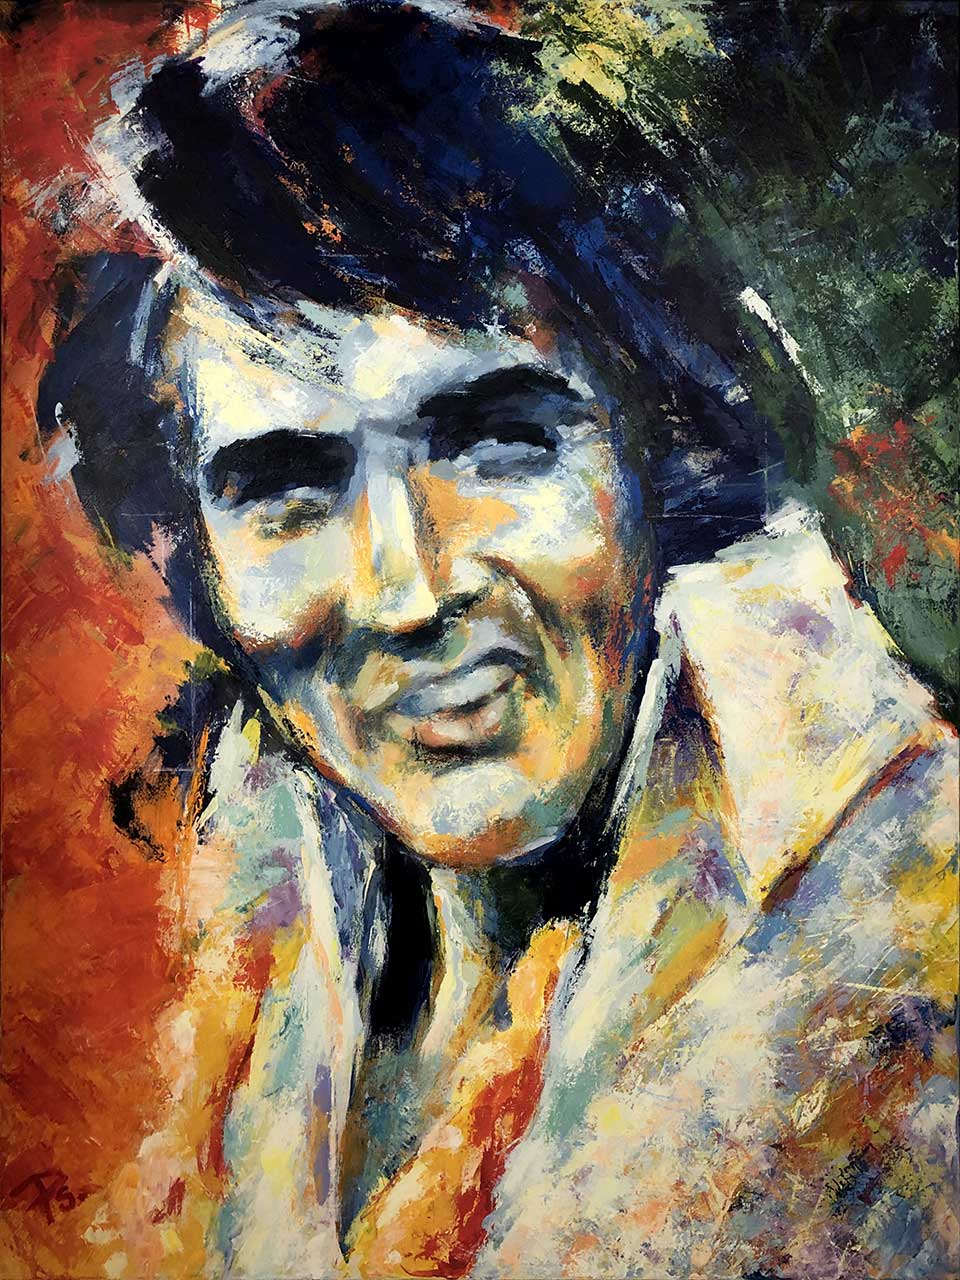 The portrait of Elvis Presley: The painting is titled 'The King' and created by the Danish portrait painter Peter Simonsen